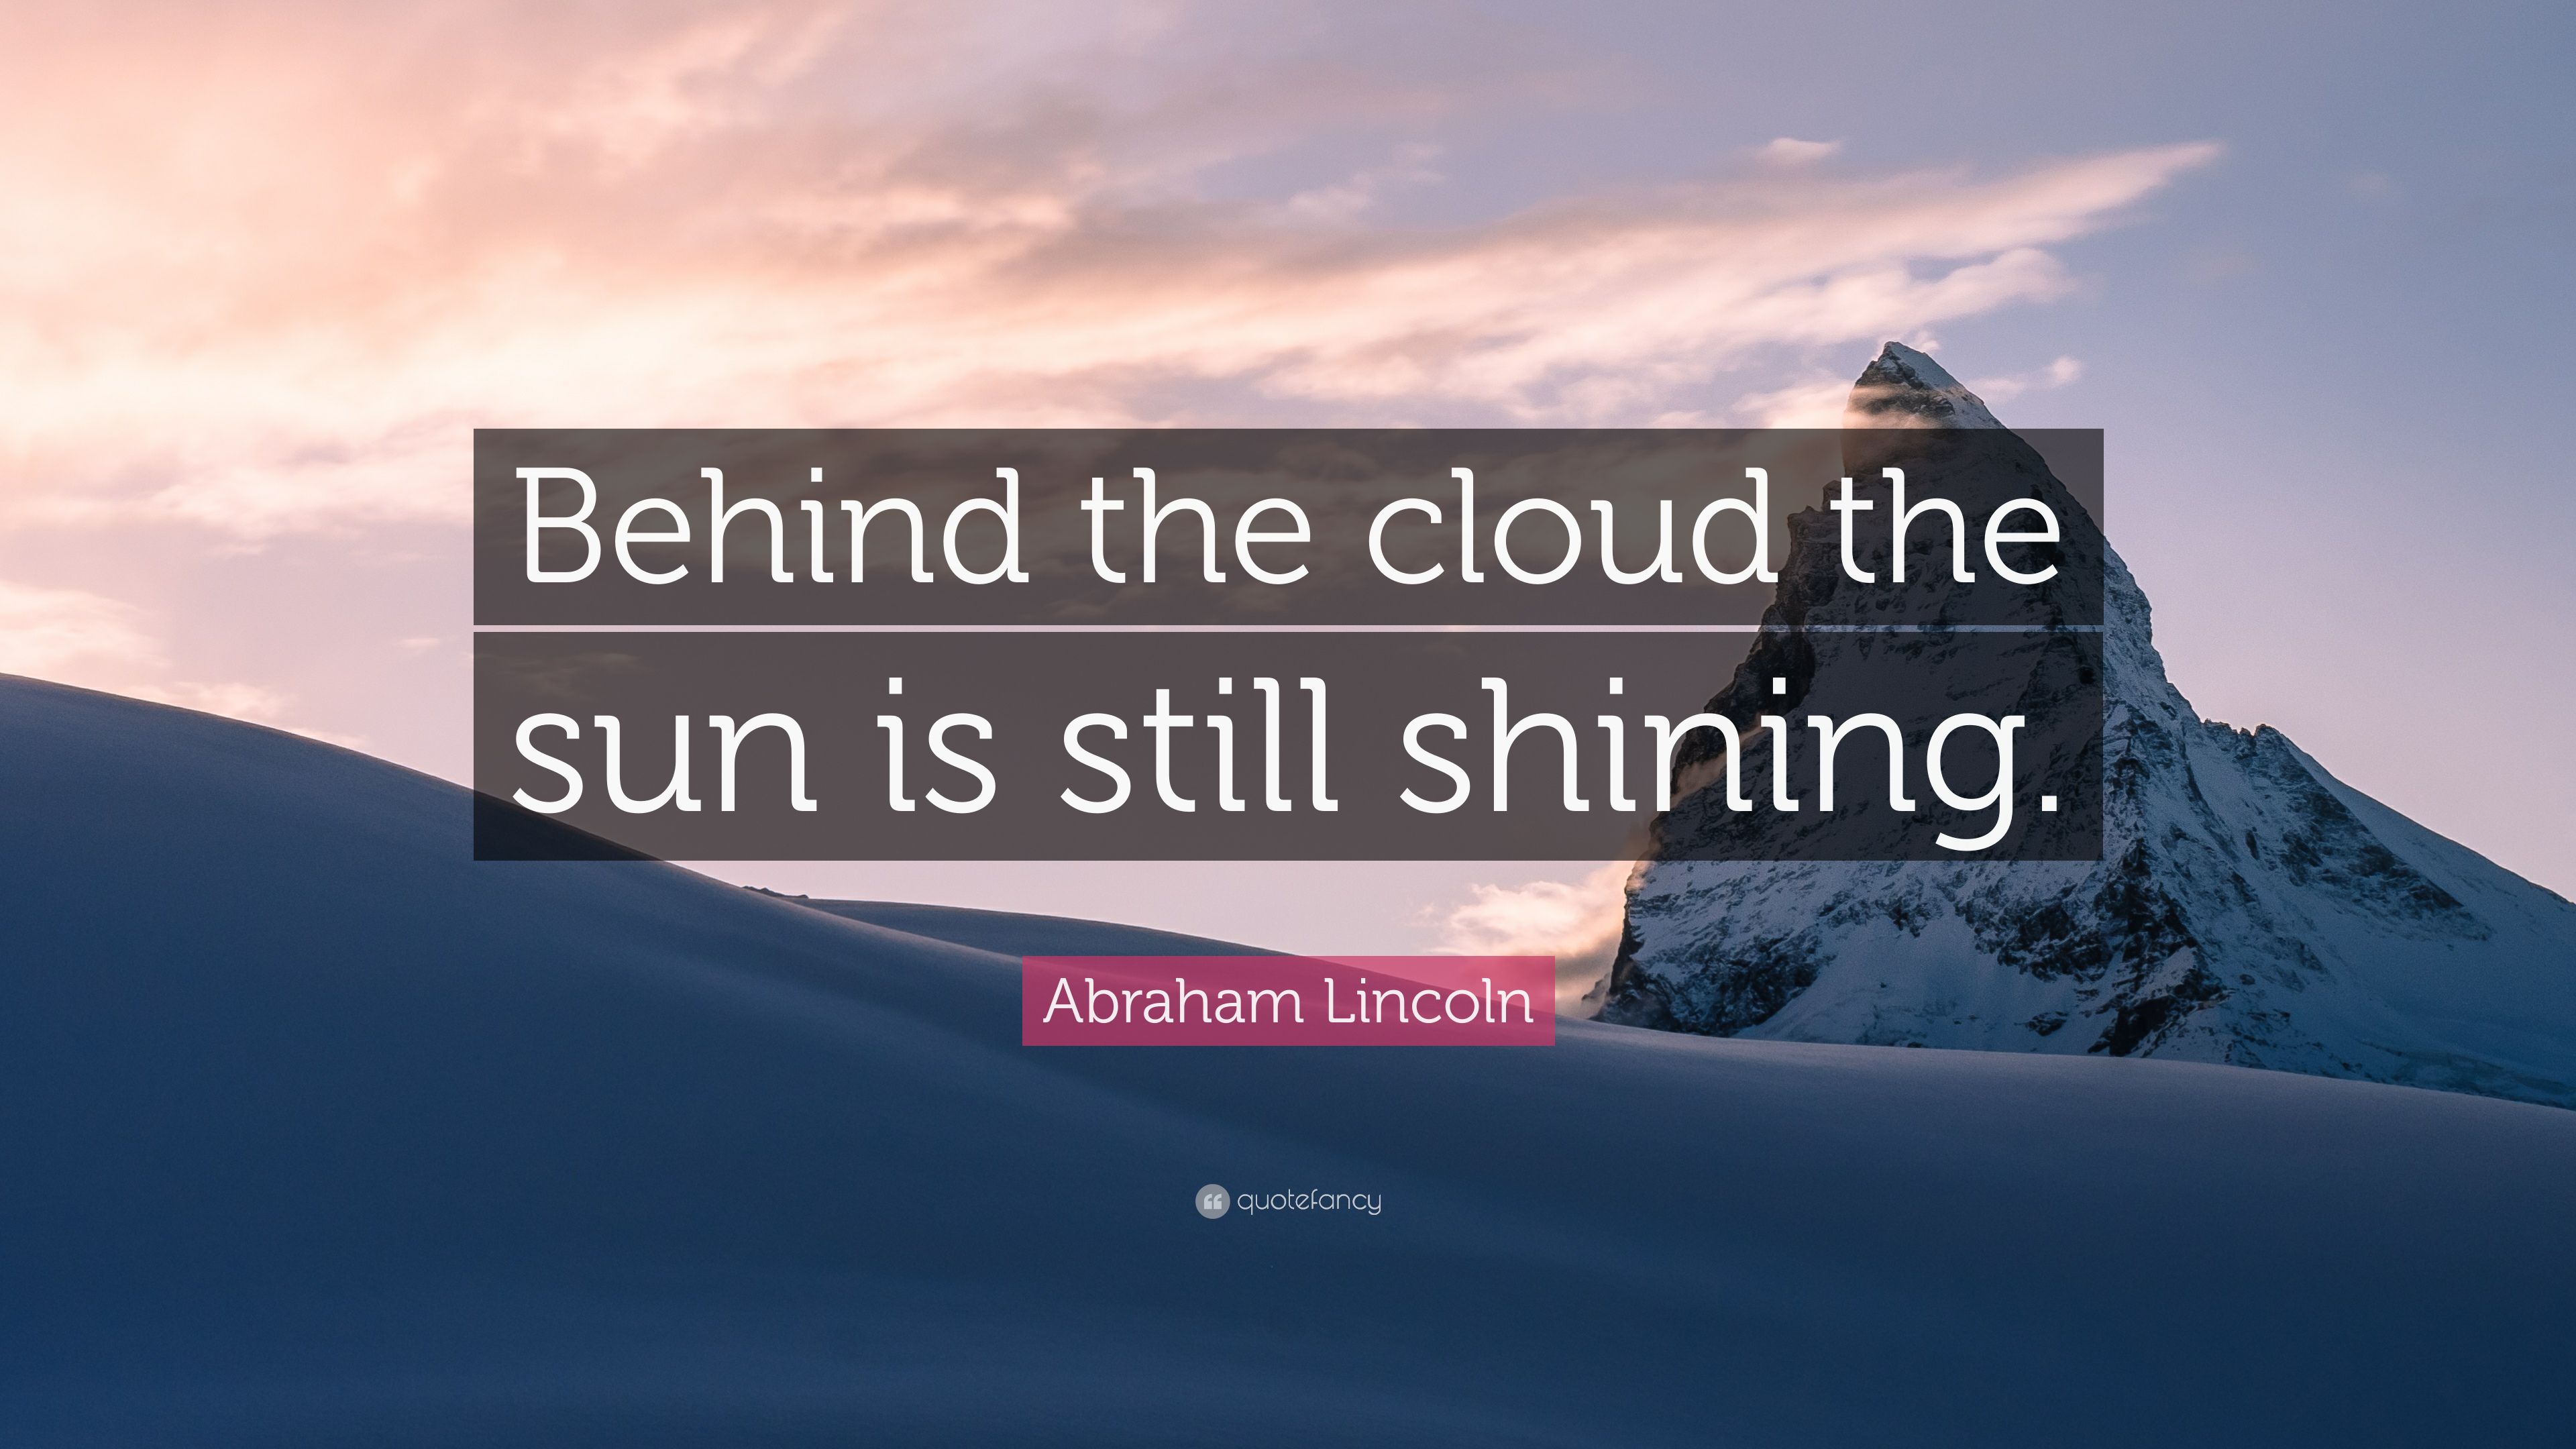 Abraham Lincoln Quote: “Behind the cloud the sun is still shining